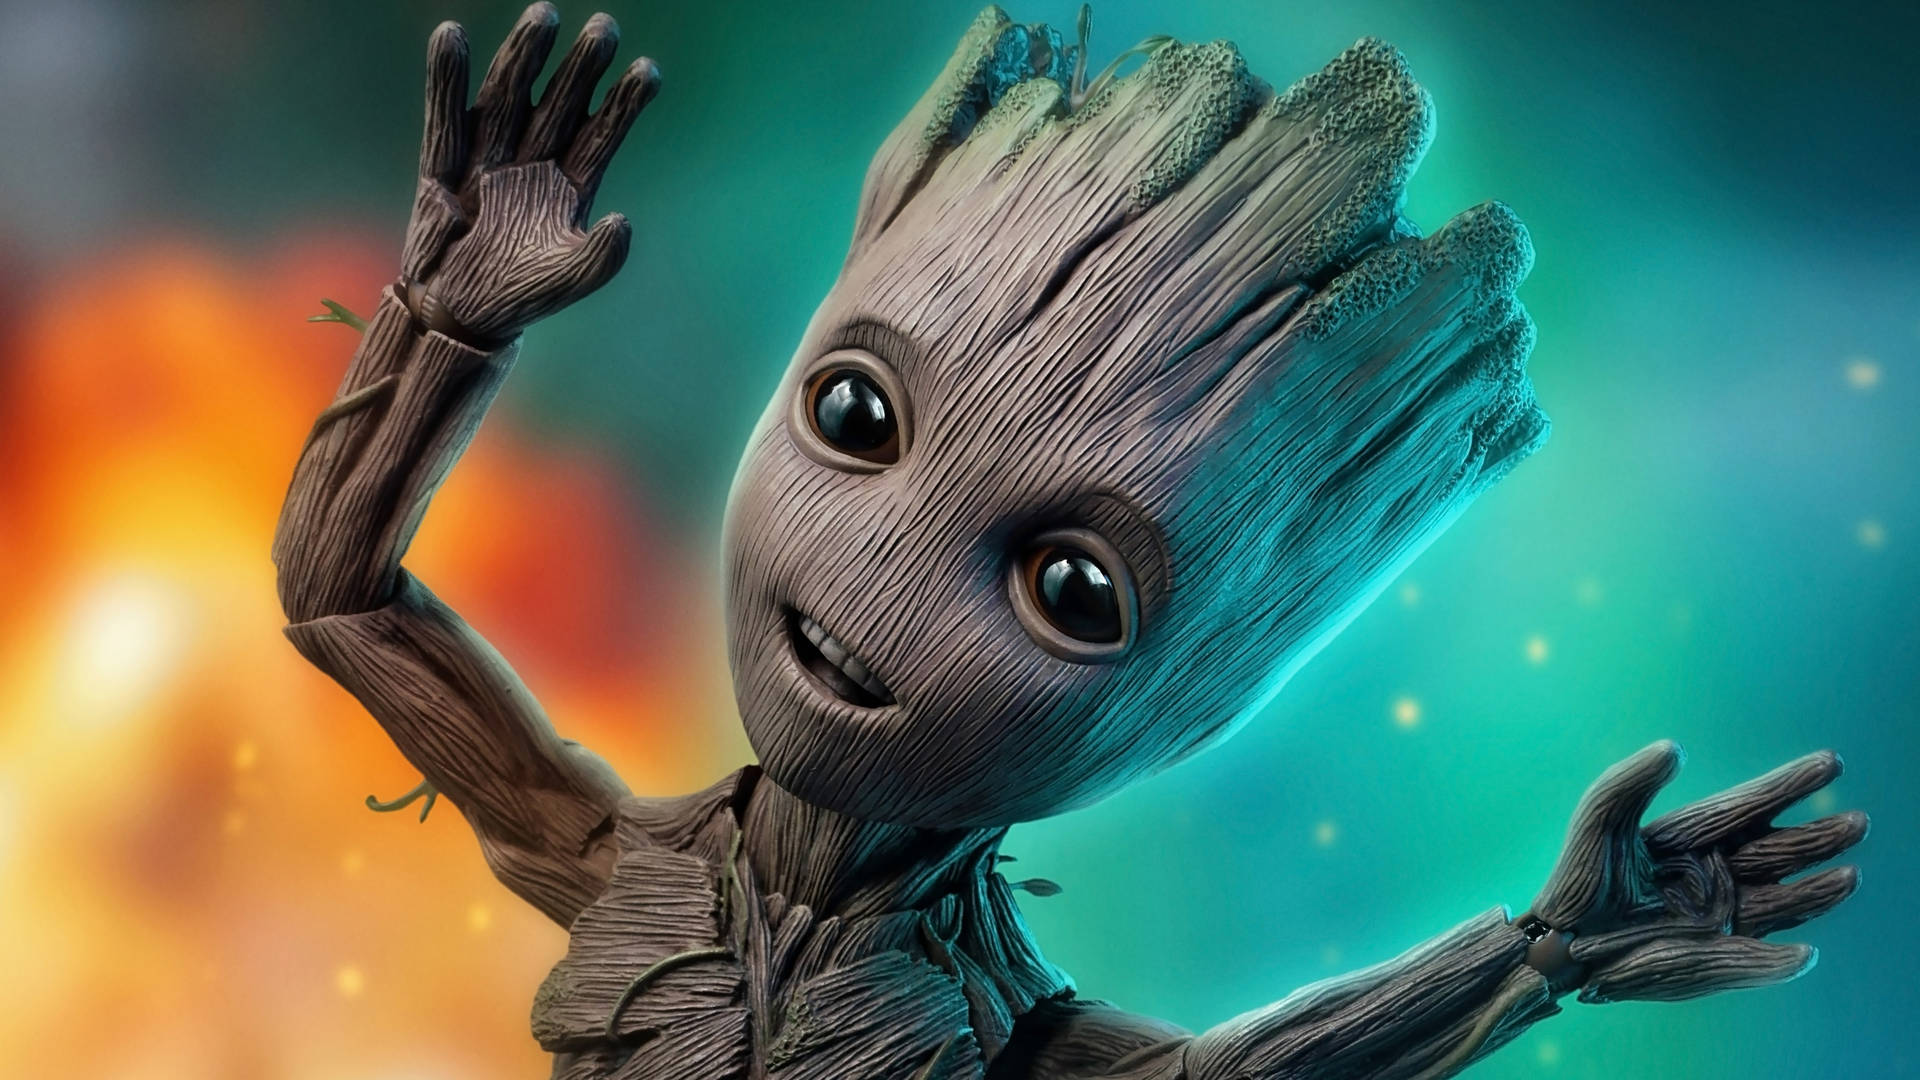 Baby Groot Orange And Green Background Wallpaper